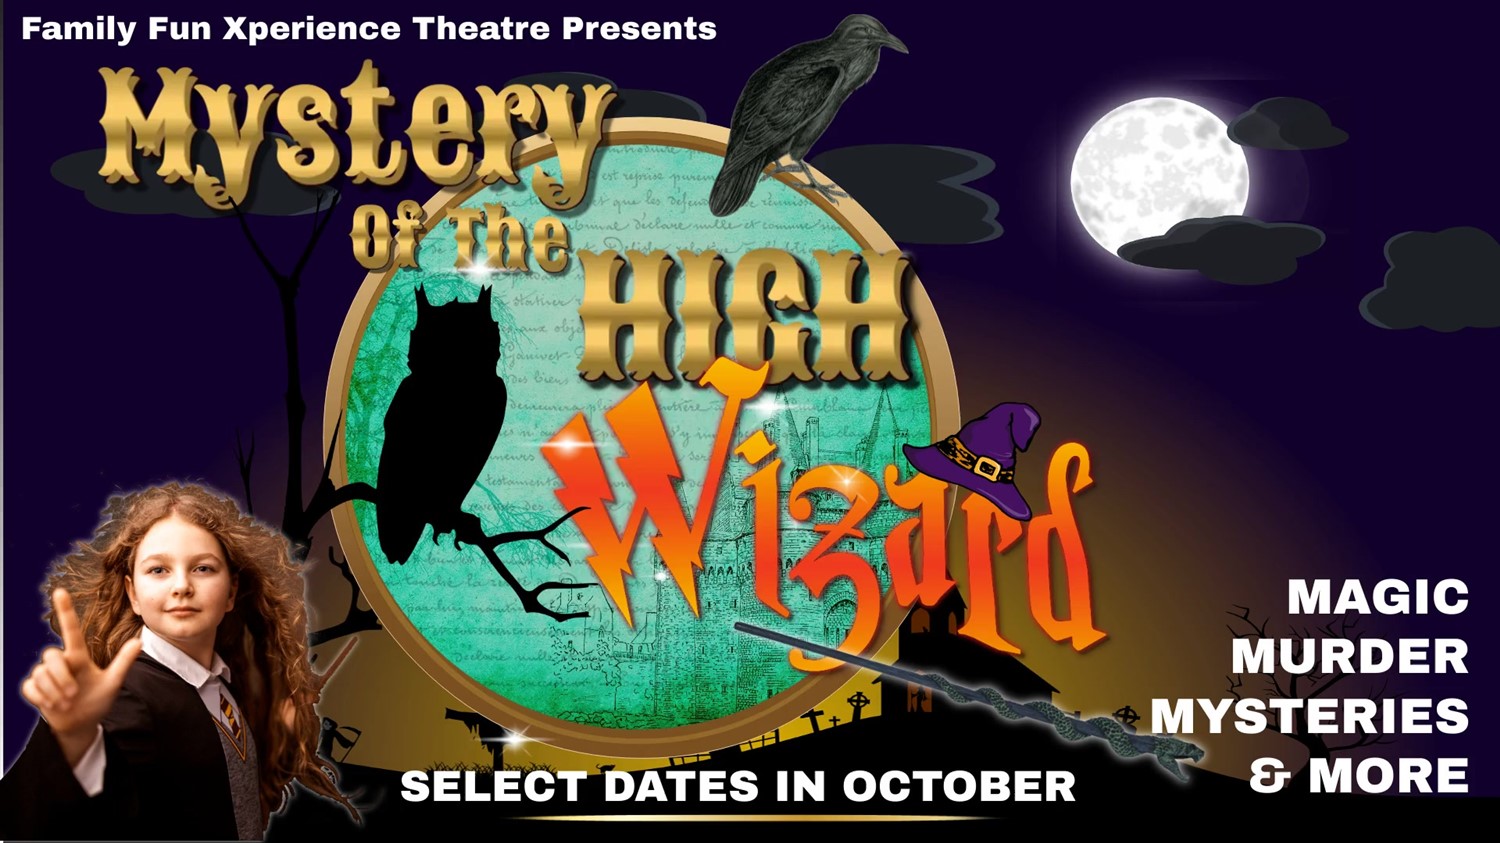 🗝 MYSTERY of the HIGH WIZARD⚡️ Magic, Murder, Mysteries, and More to solve! on Oct 30, 19:00@FFX Theatre - Pick a seat, Buy tickets and Get information on Family Fun Xperience tickets.ffxshow.org